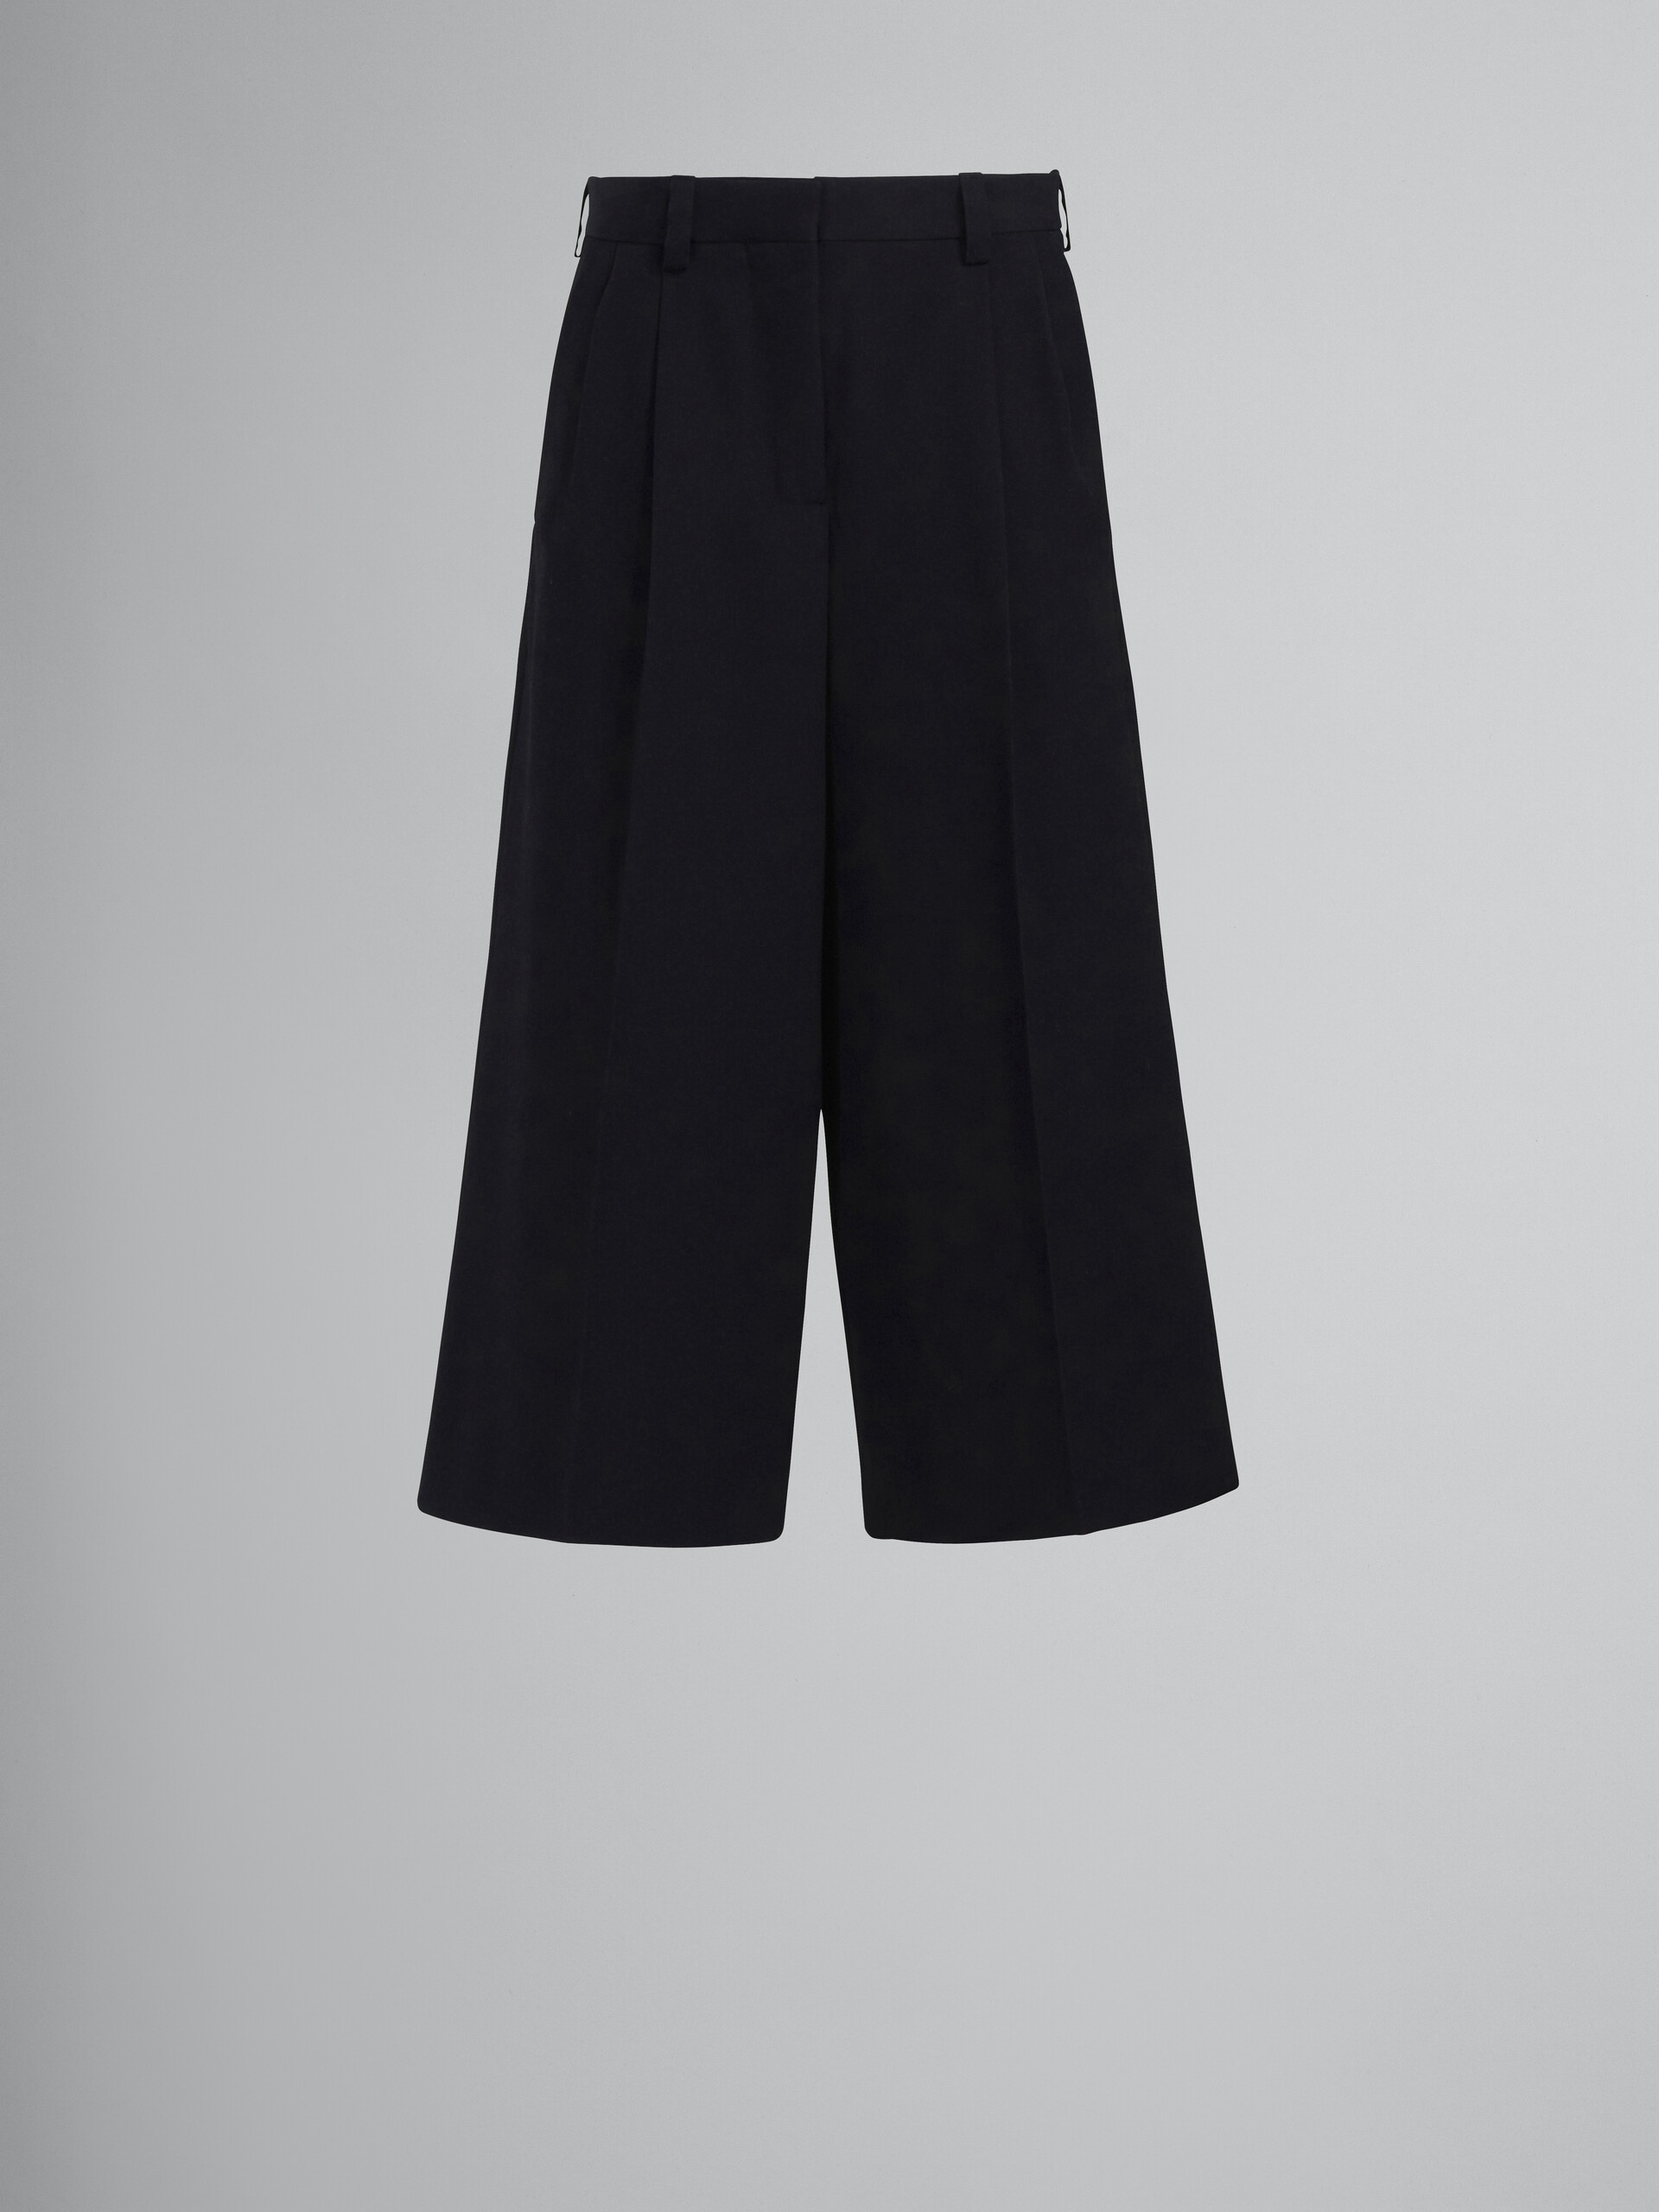 CROPPED BLACK TAILORED PANTS - 1